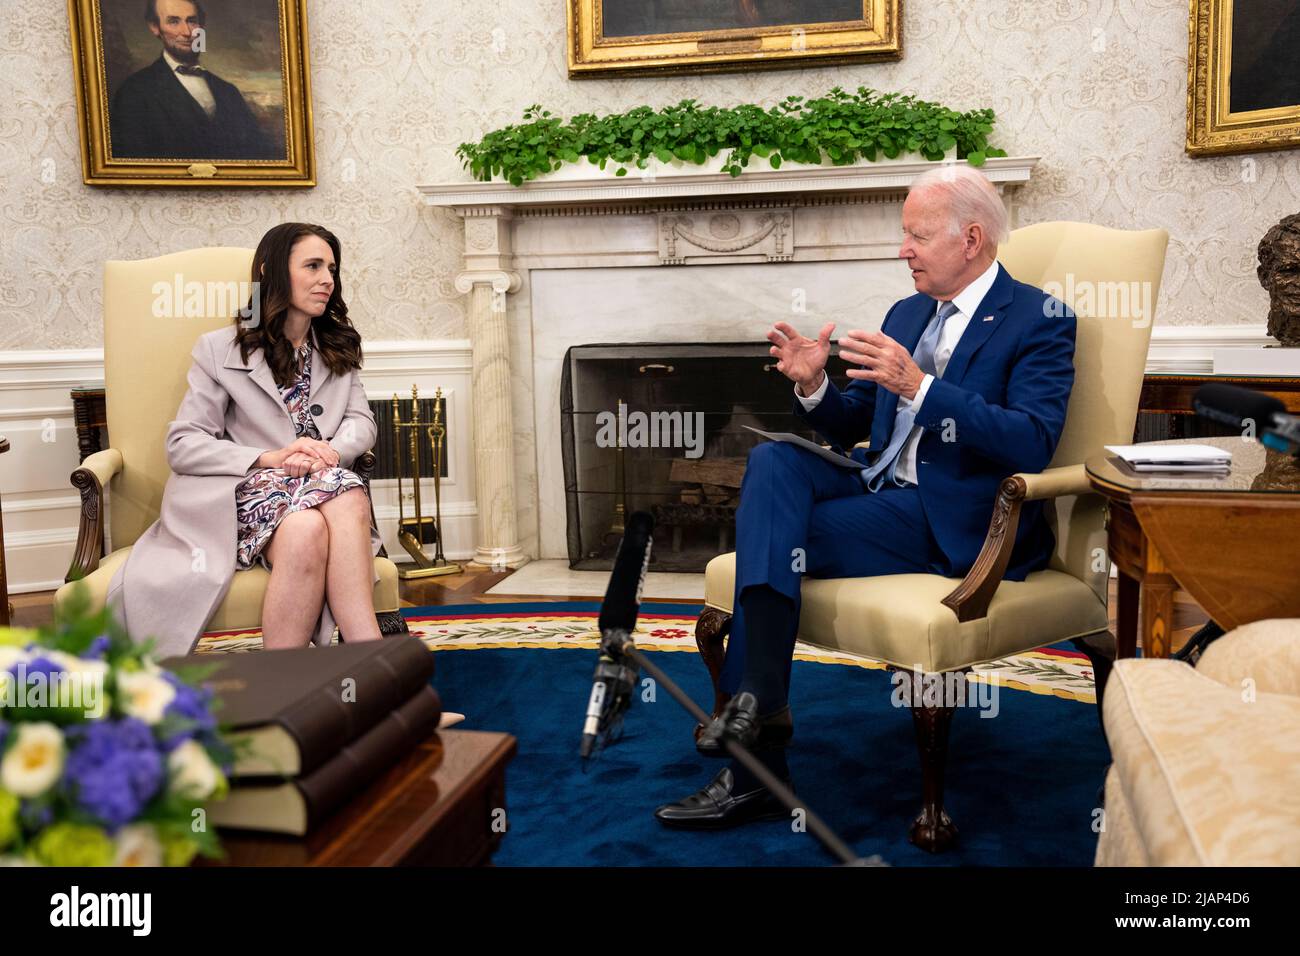 Washington, US, May 31, 2022. President Joe Biden meets with Jacinda Ardern, Prime Minister of New Zealand in the Oval Office, Tuesday, May 31, 2022. ( Photo by Doug Mills/The New York Times)United States President Joe Biden meets with, Prime Minister Jacinda Ardern of New Zealand in the Oval Office of the White House in Washington, DC, Tuesday, May 31, 2022. Credit: Doug Mills/Pool via CNP /MediaPunch Stock Photo